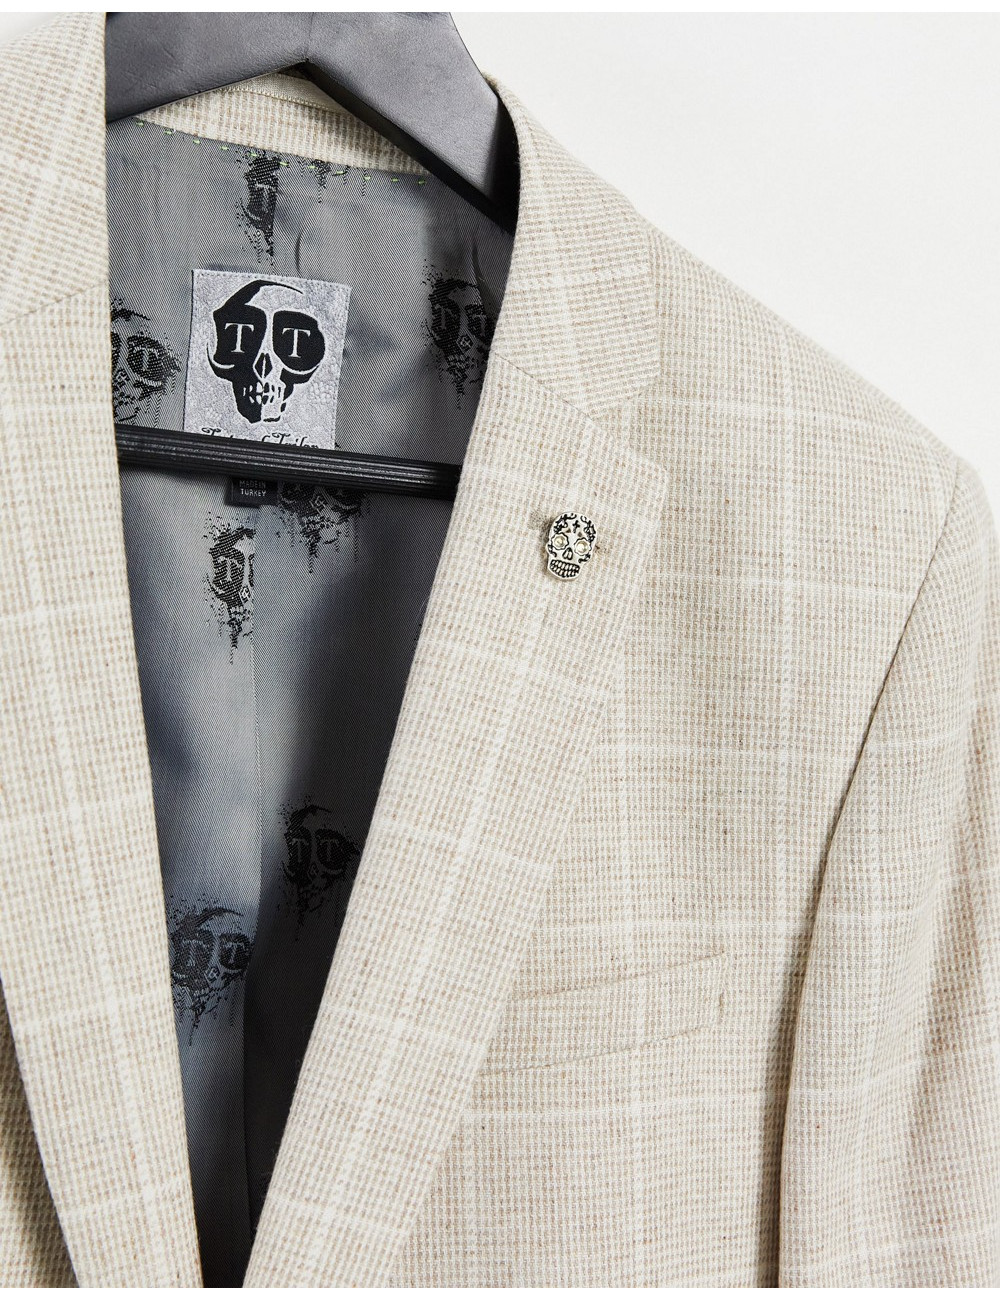 Twisted Tailor suit jacket...